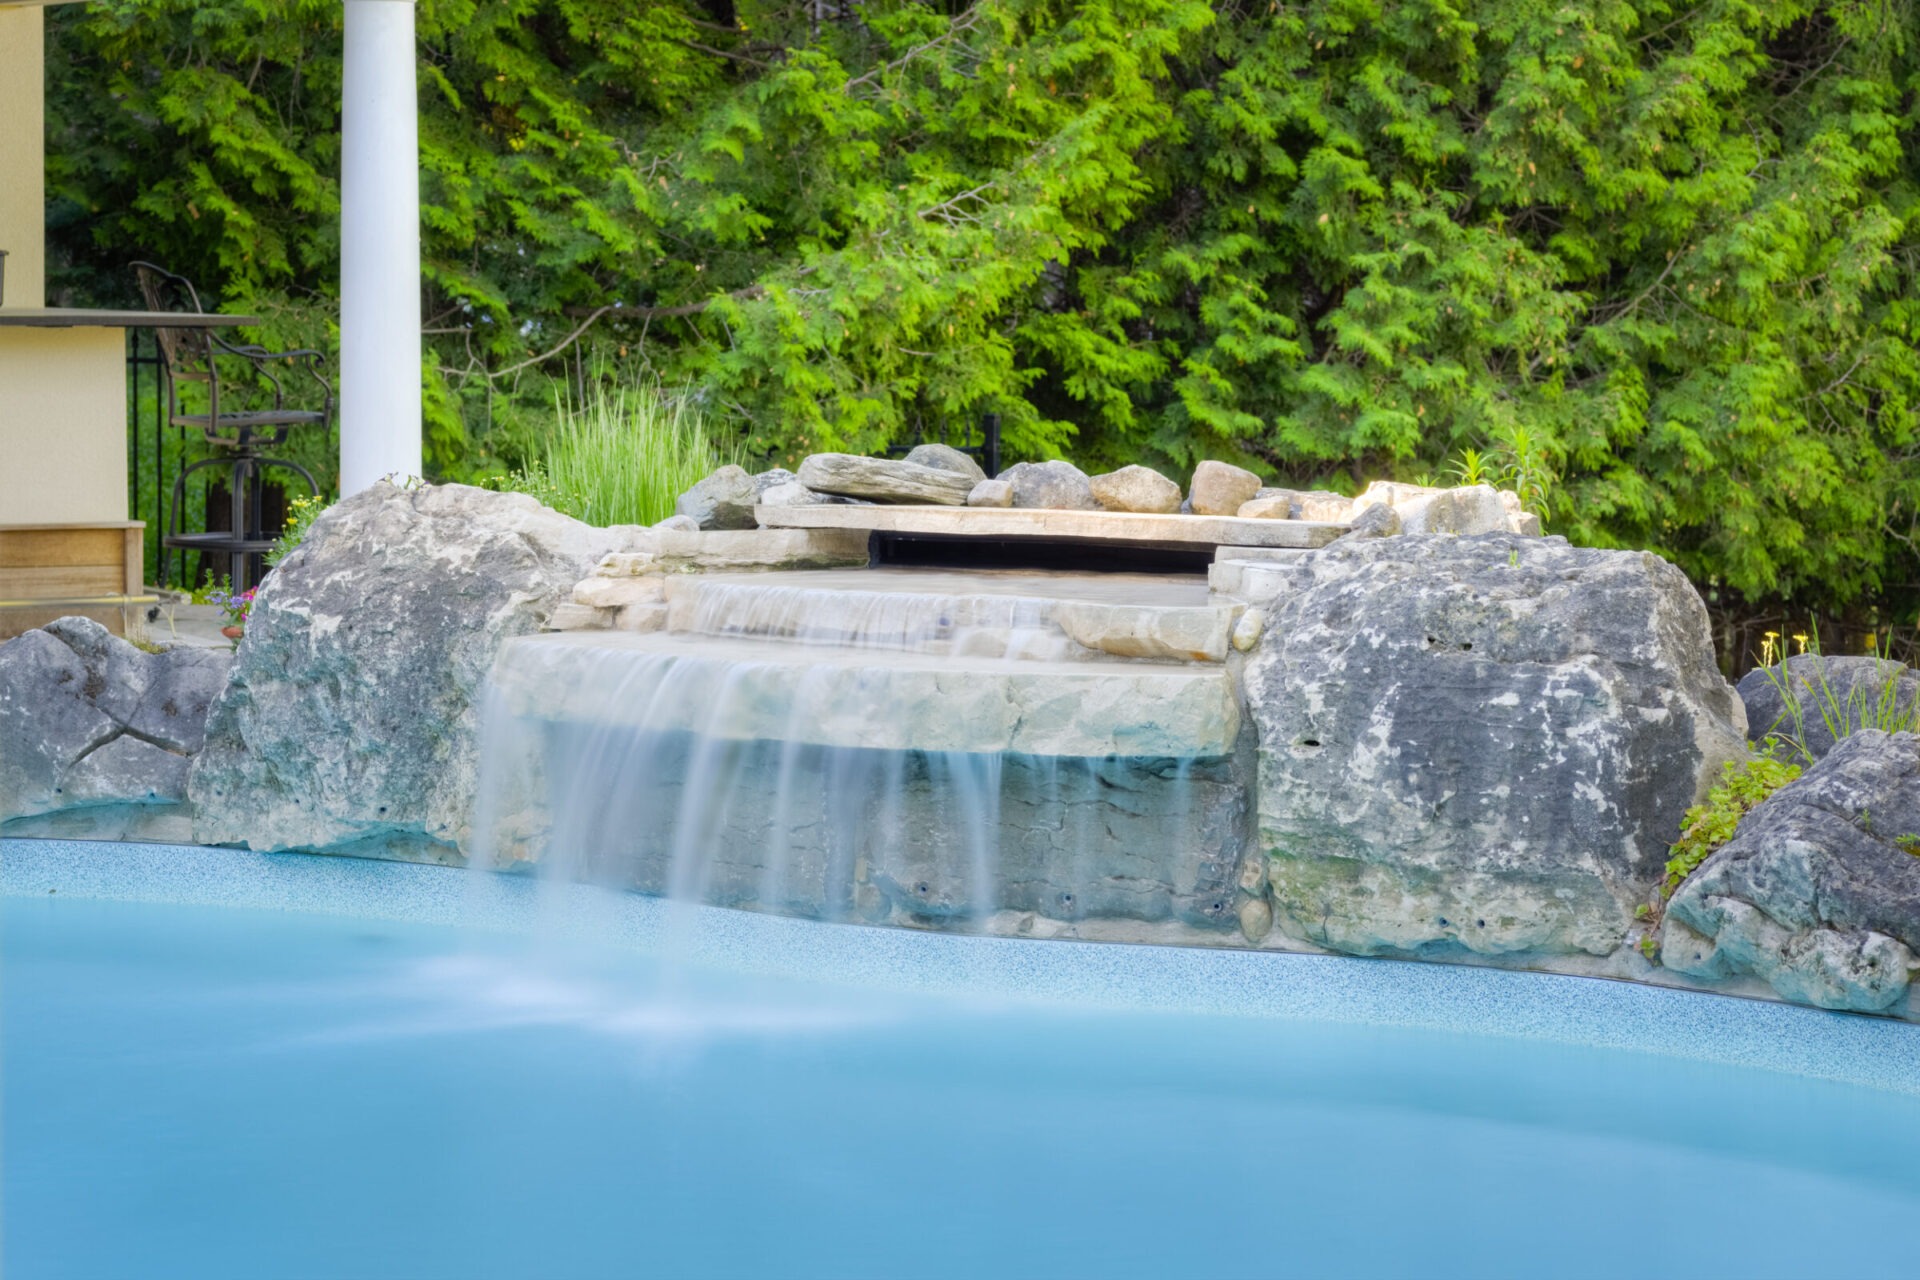 A serene artificial waterfall crafted from large stones pours into a clear blue pool, surrounded by lush greenery and a partial building view.